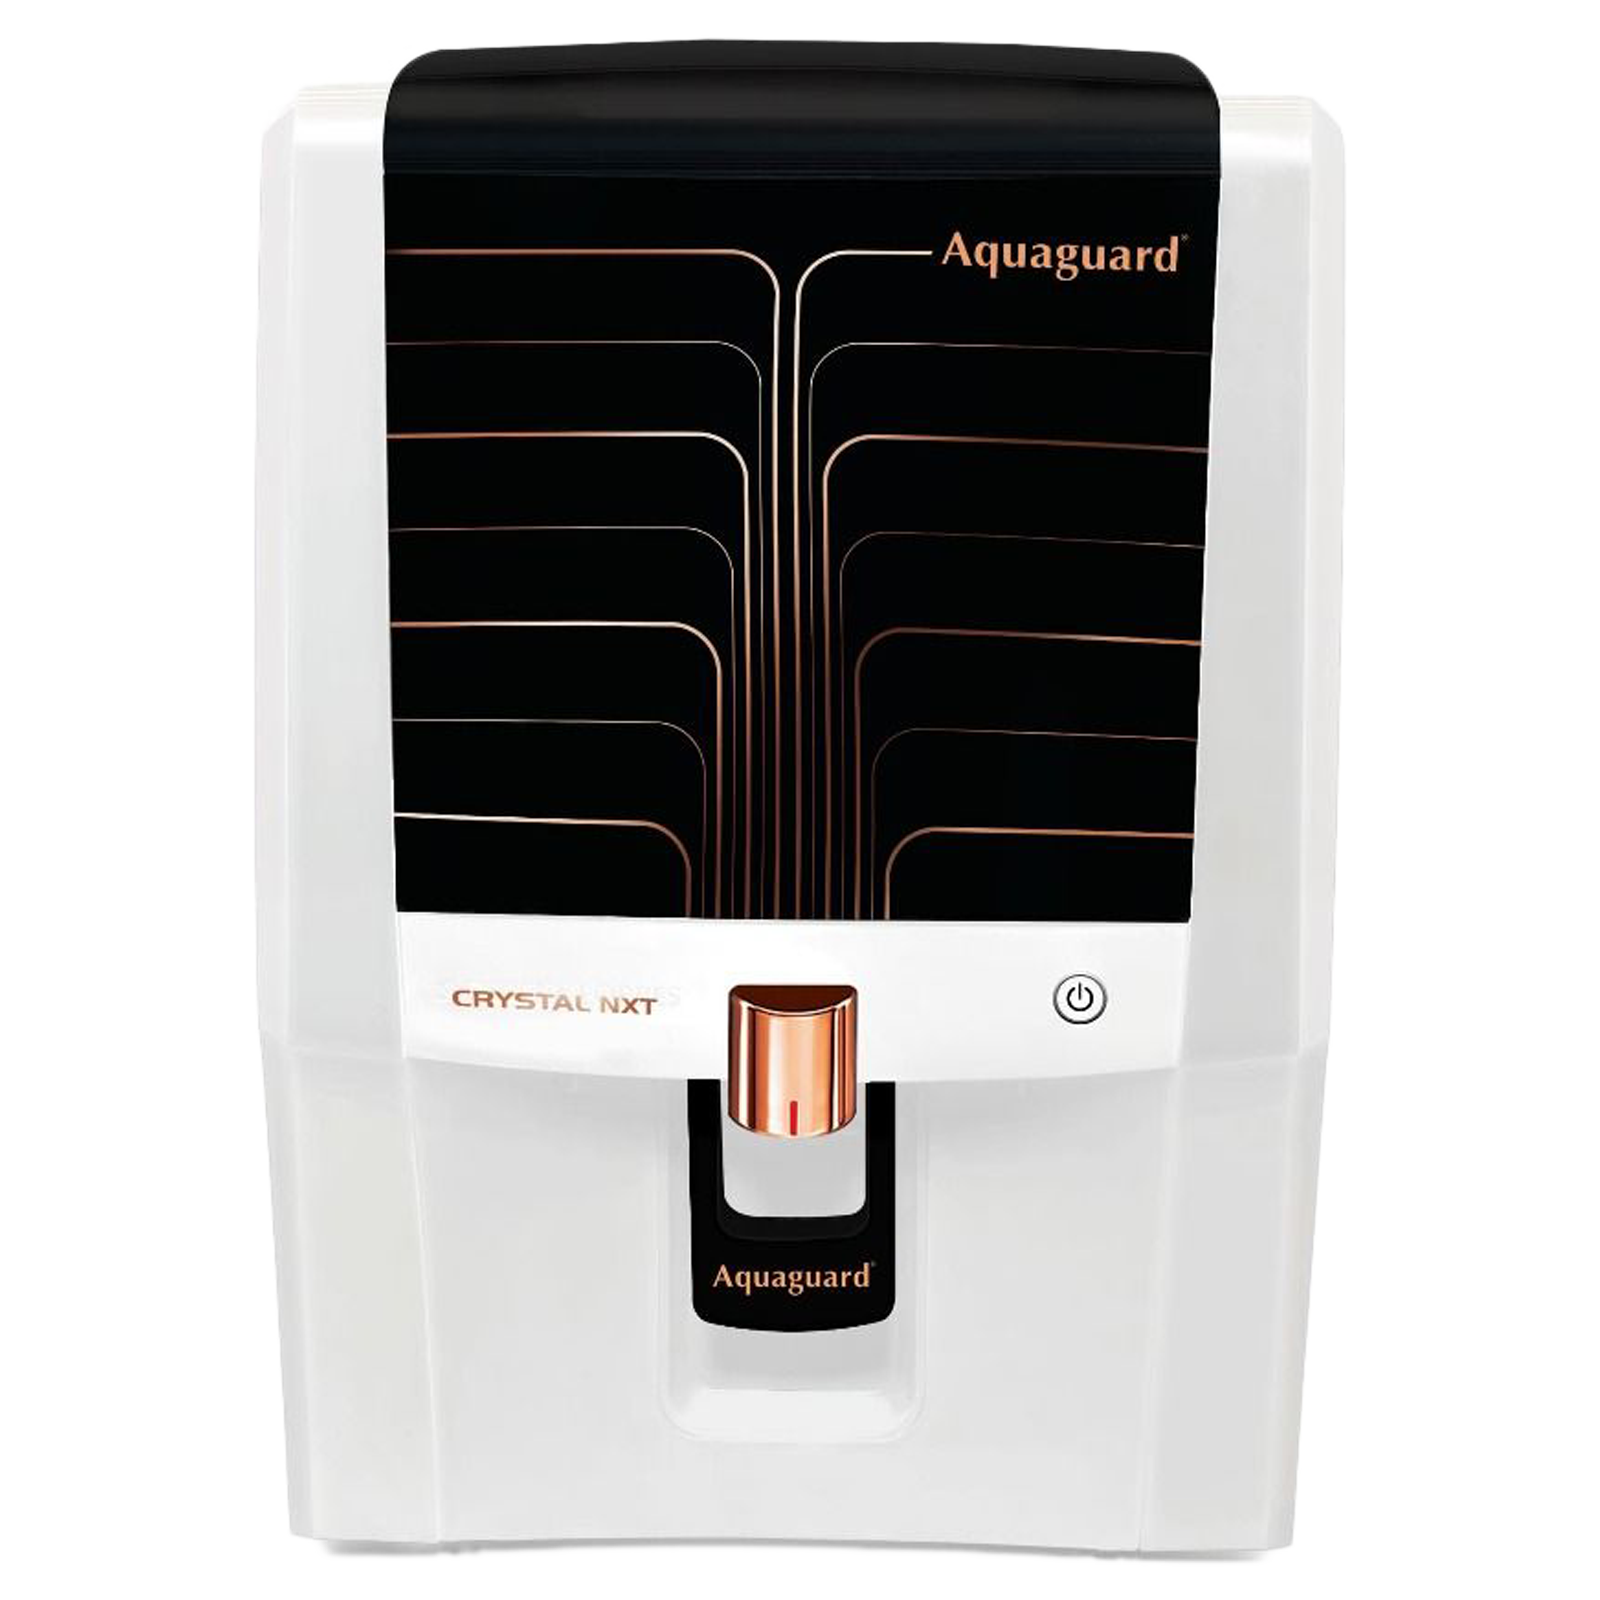 Aquaguard Crystal NXT HR RO + UV + MTDS Electrical Water Purifier (Active Copper Technology, GWPDCTLHR00000, Black)_1